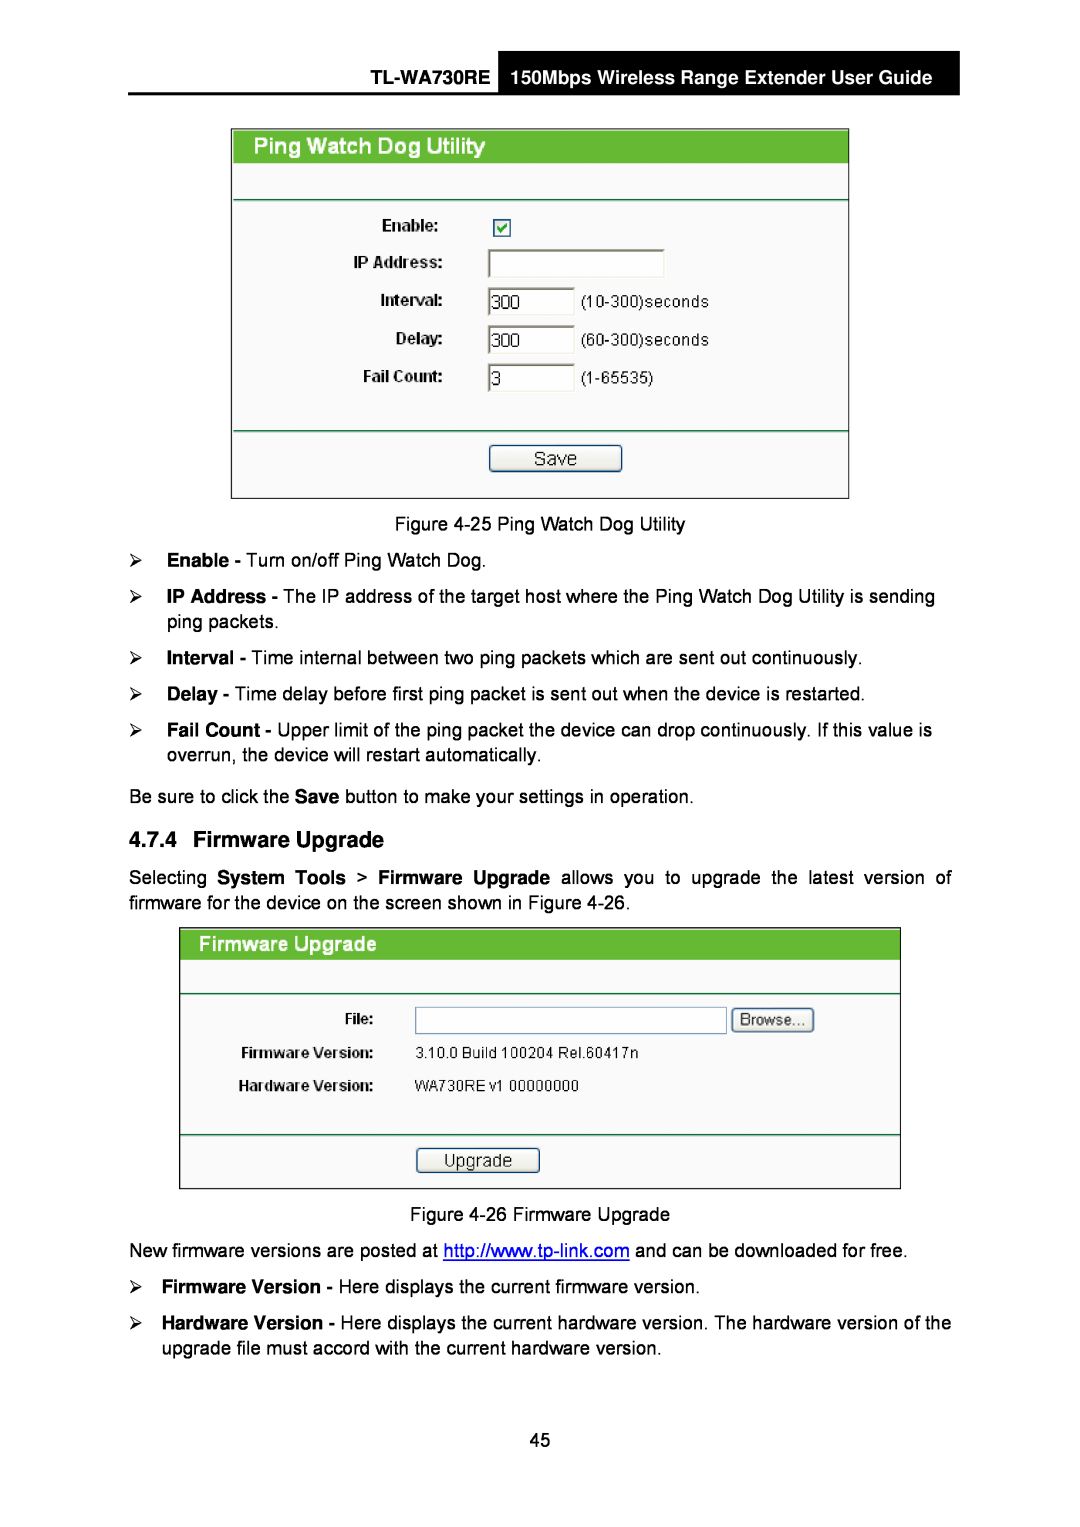 TP-Link manual Firmware Upgrade, TL-WA730RE 150Mbps Wireless Range Extender User Guide 